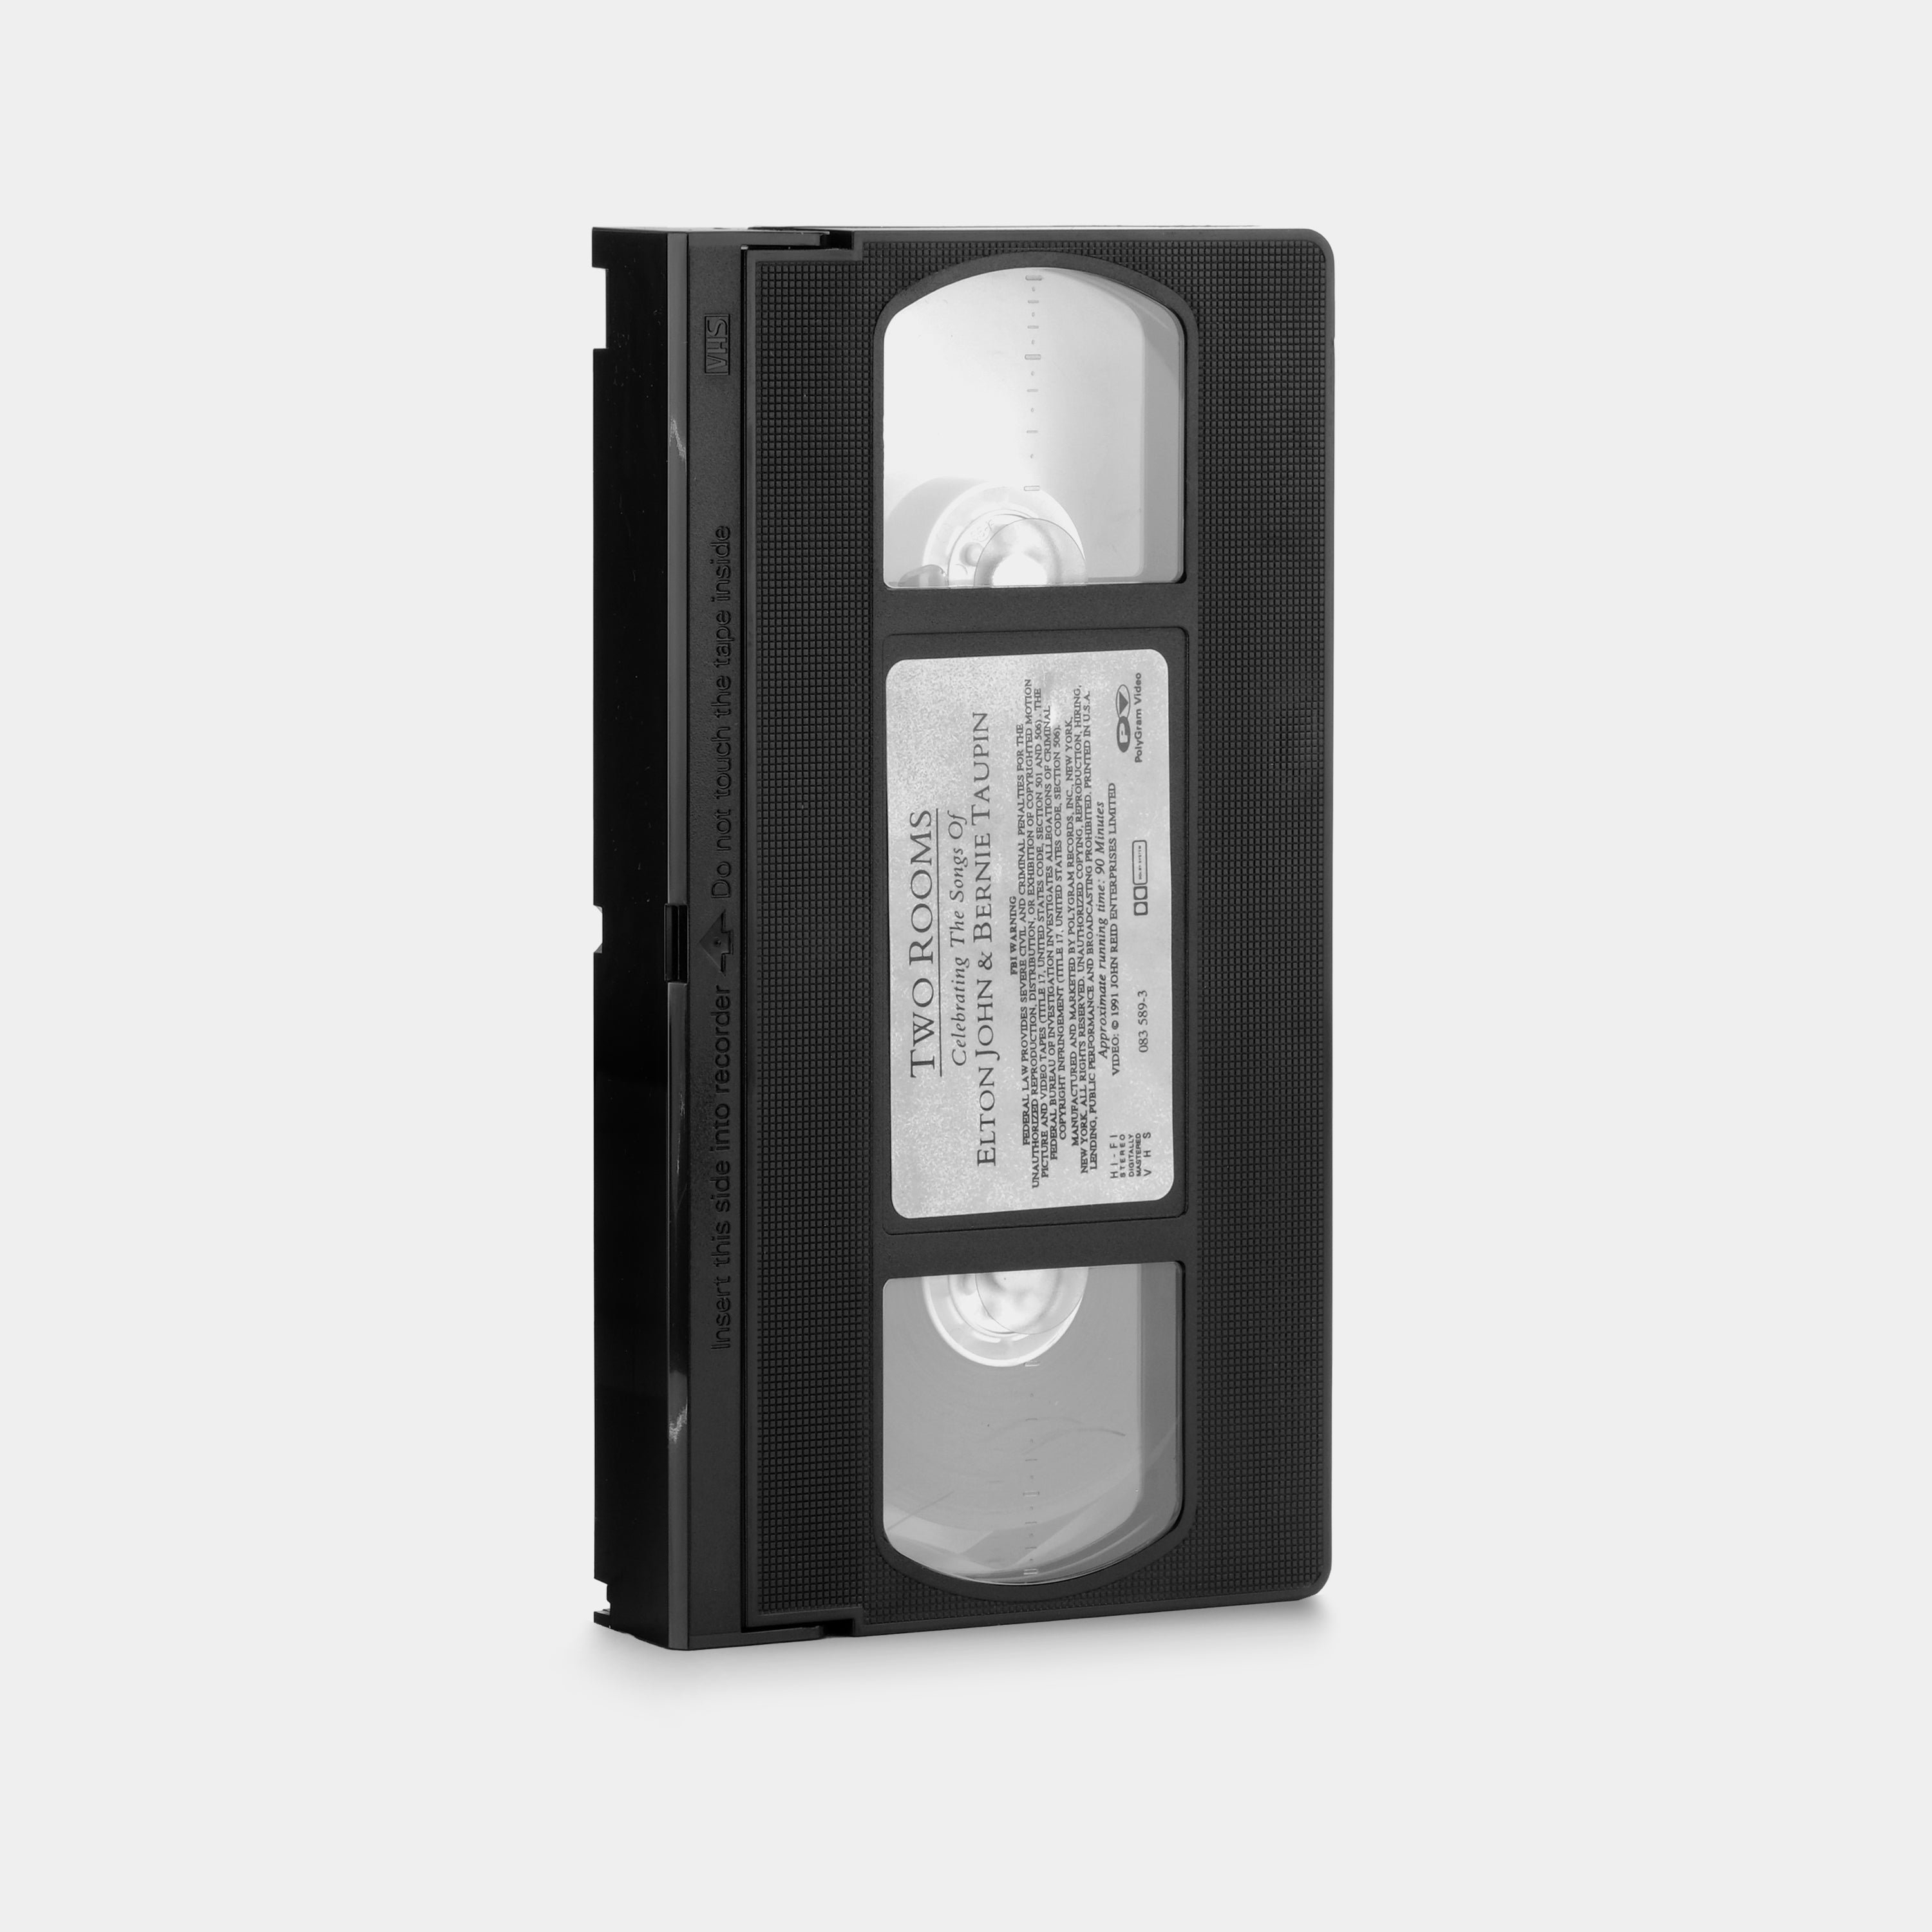 Two Rooms: A Tribute to Elton John & Bernie Taupin VHS Tape